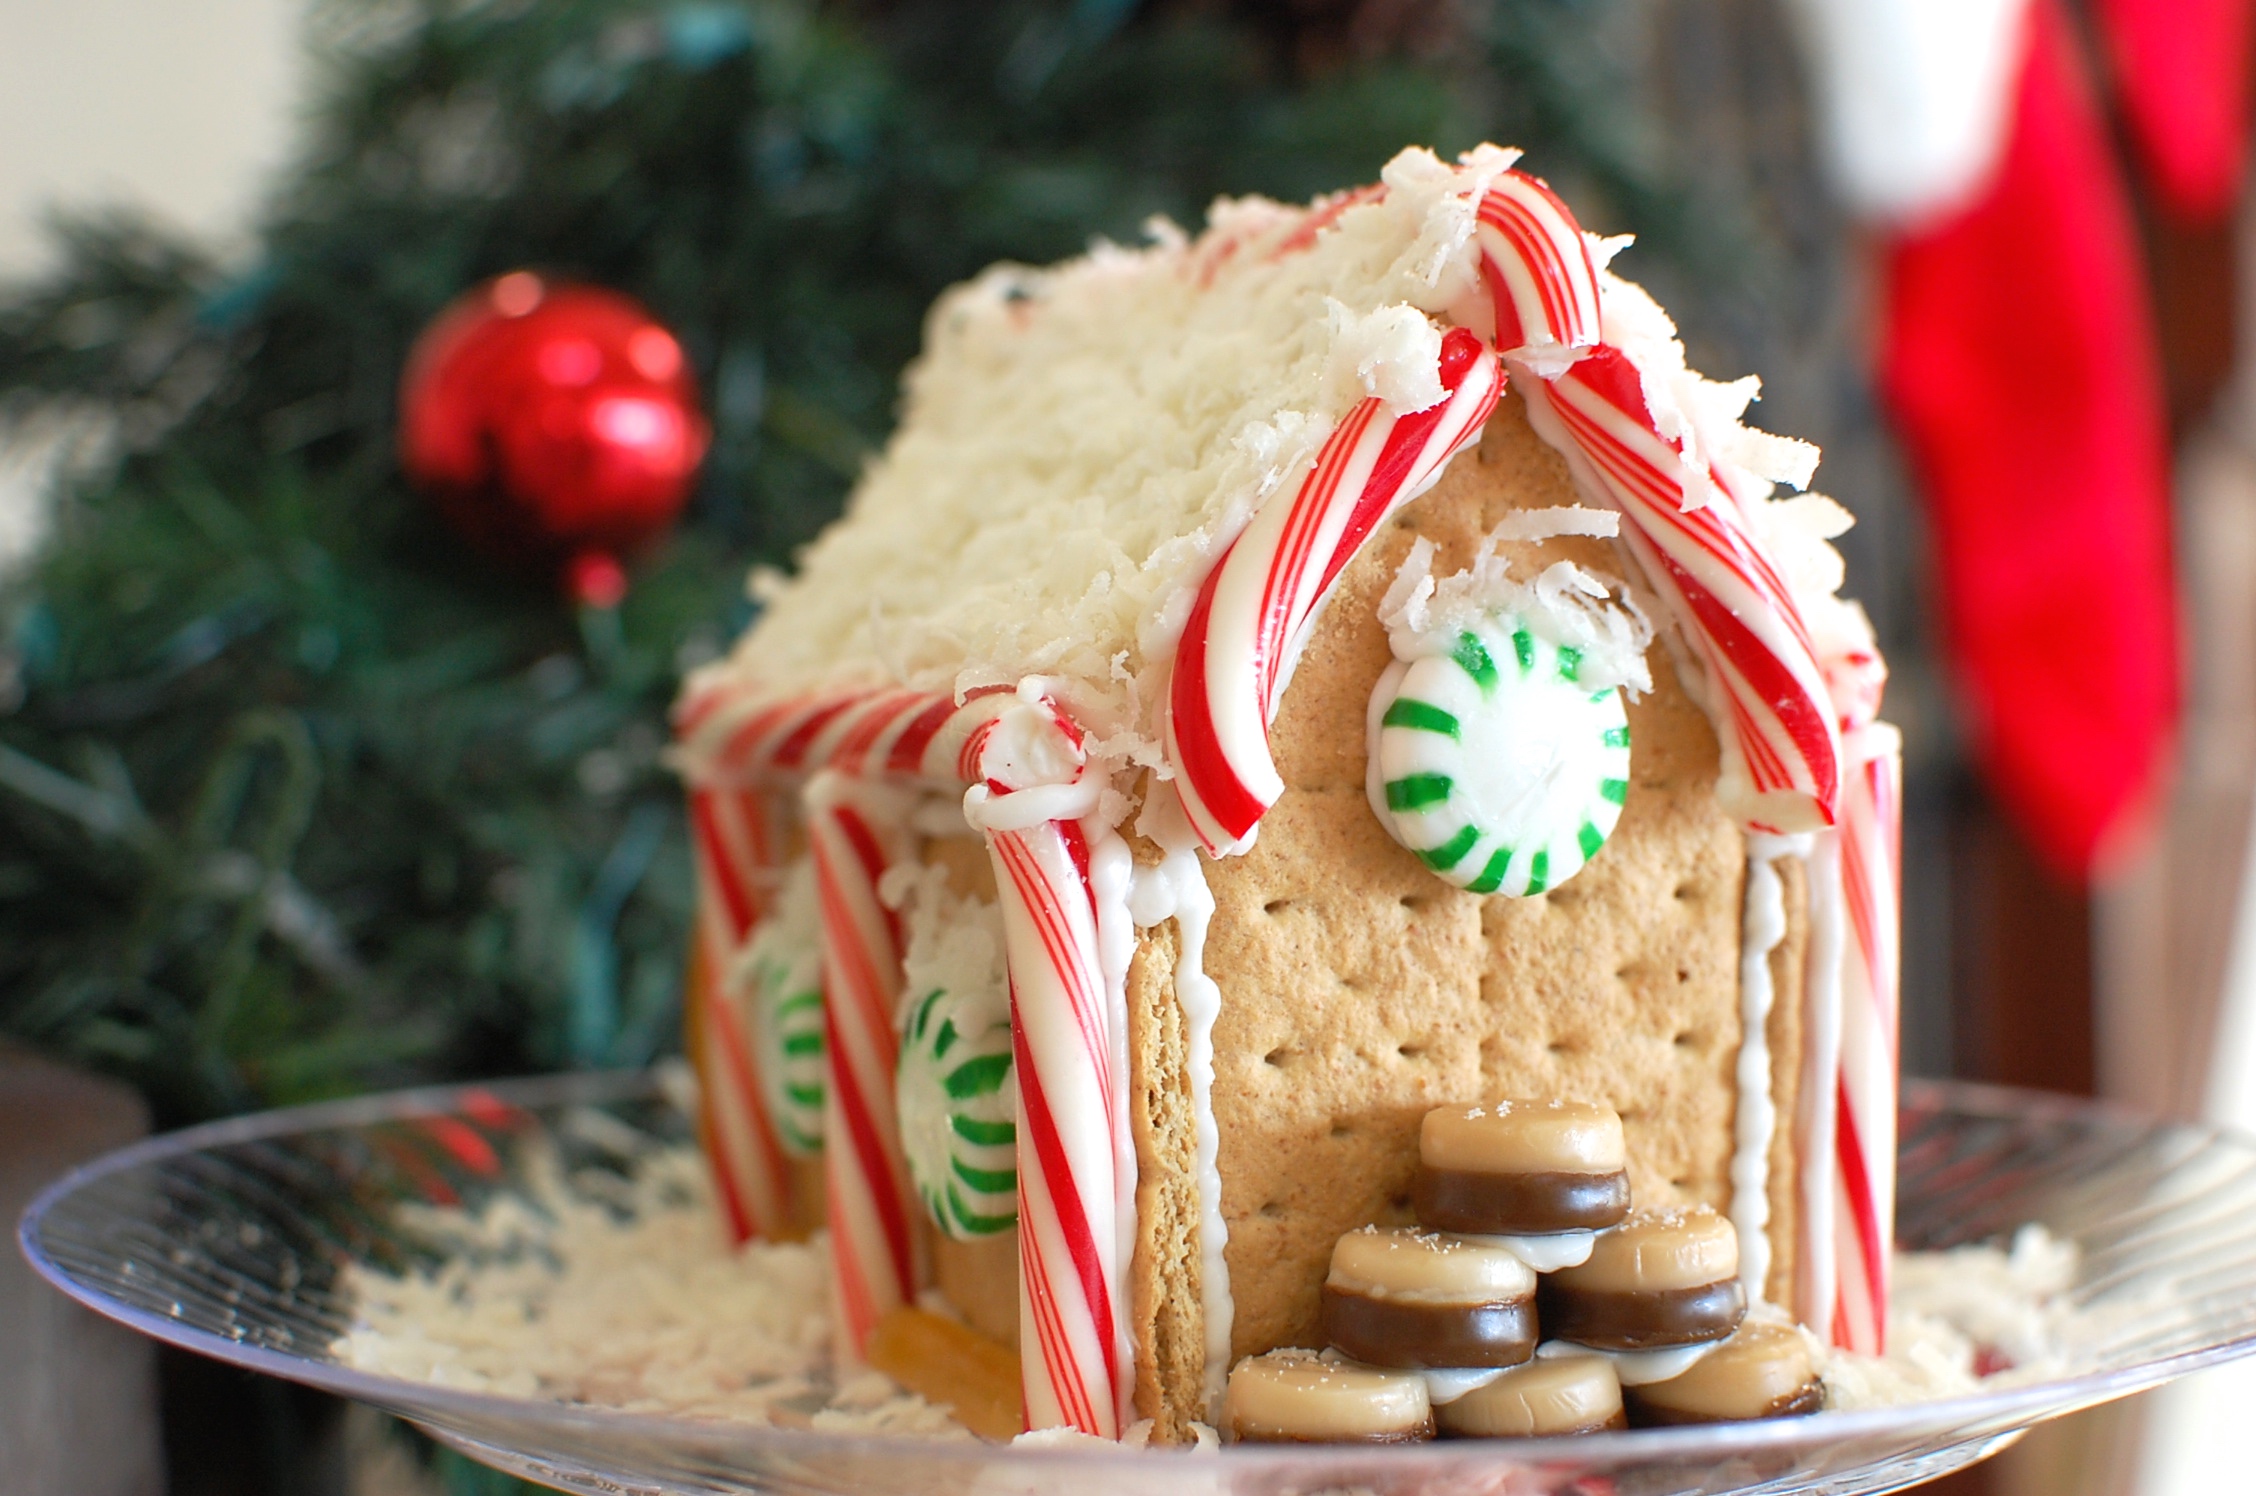 A gingerbread house made of graham crackers